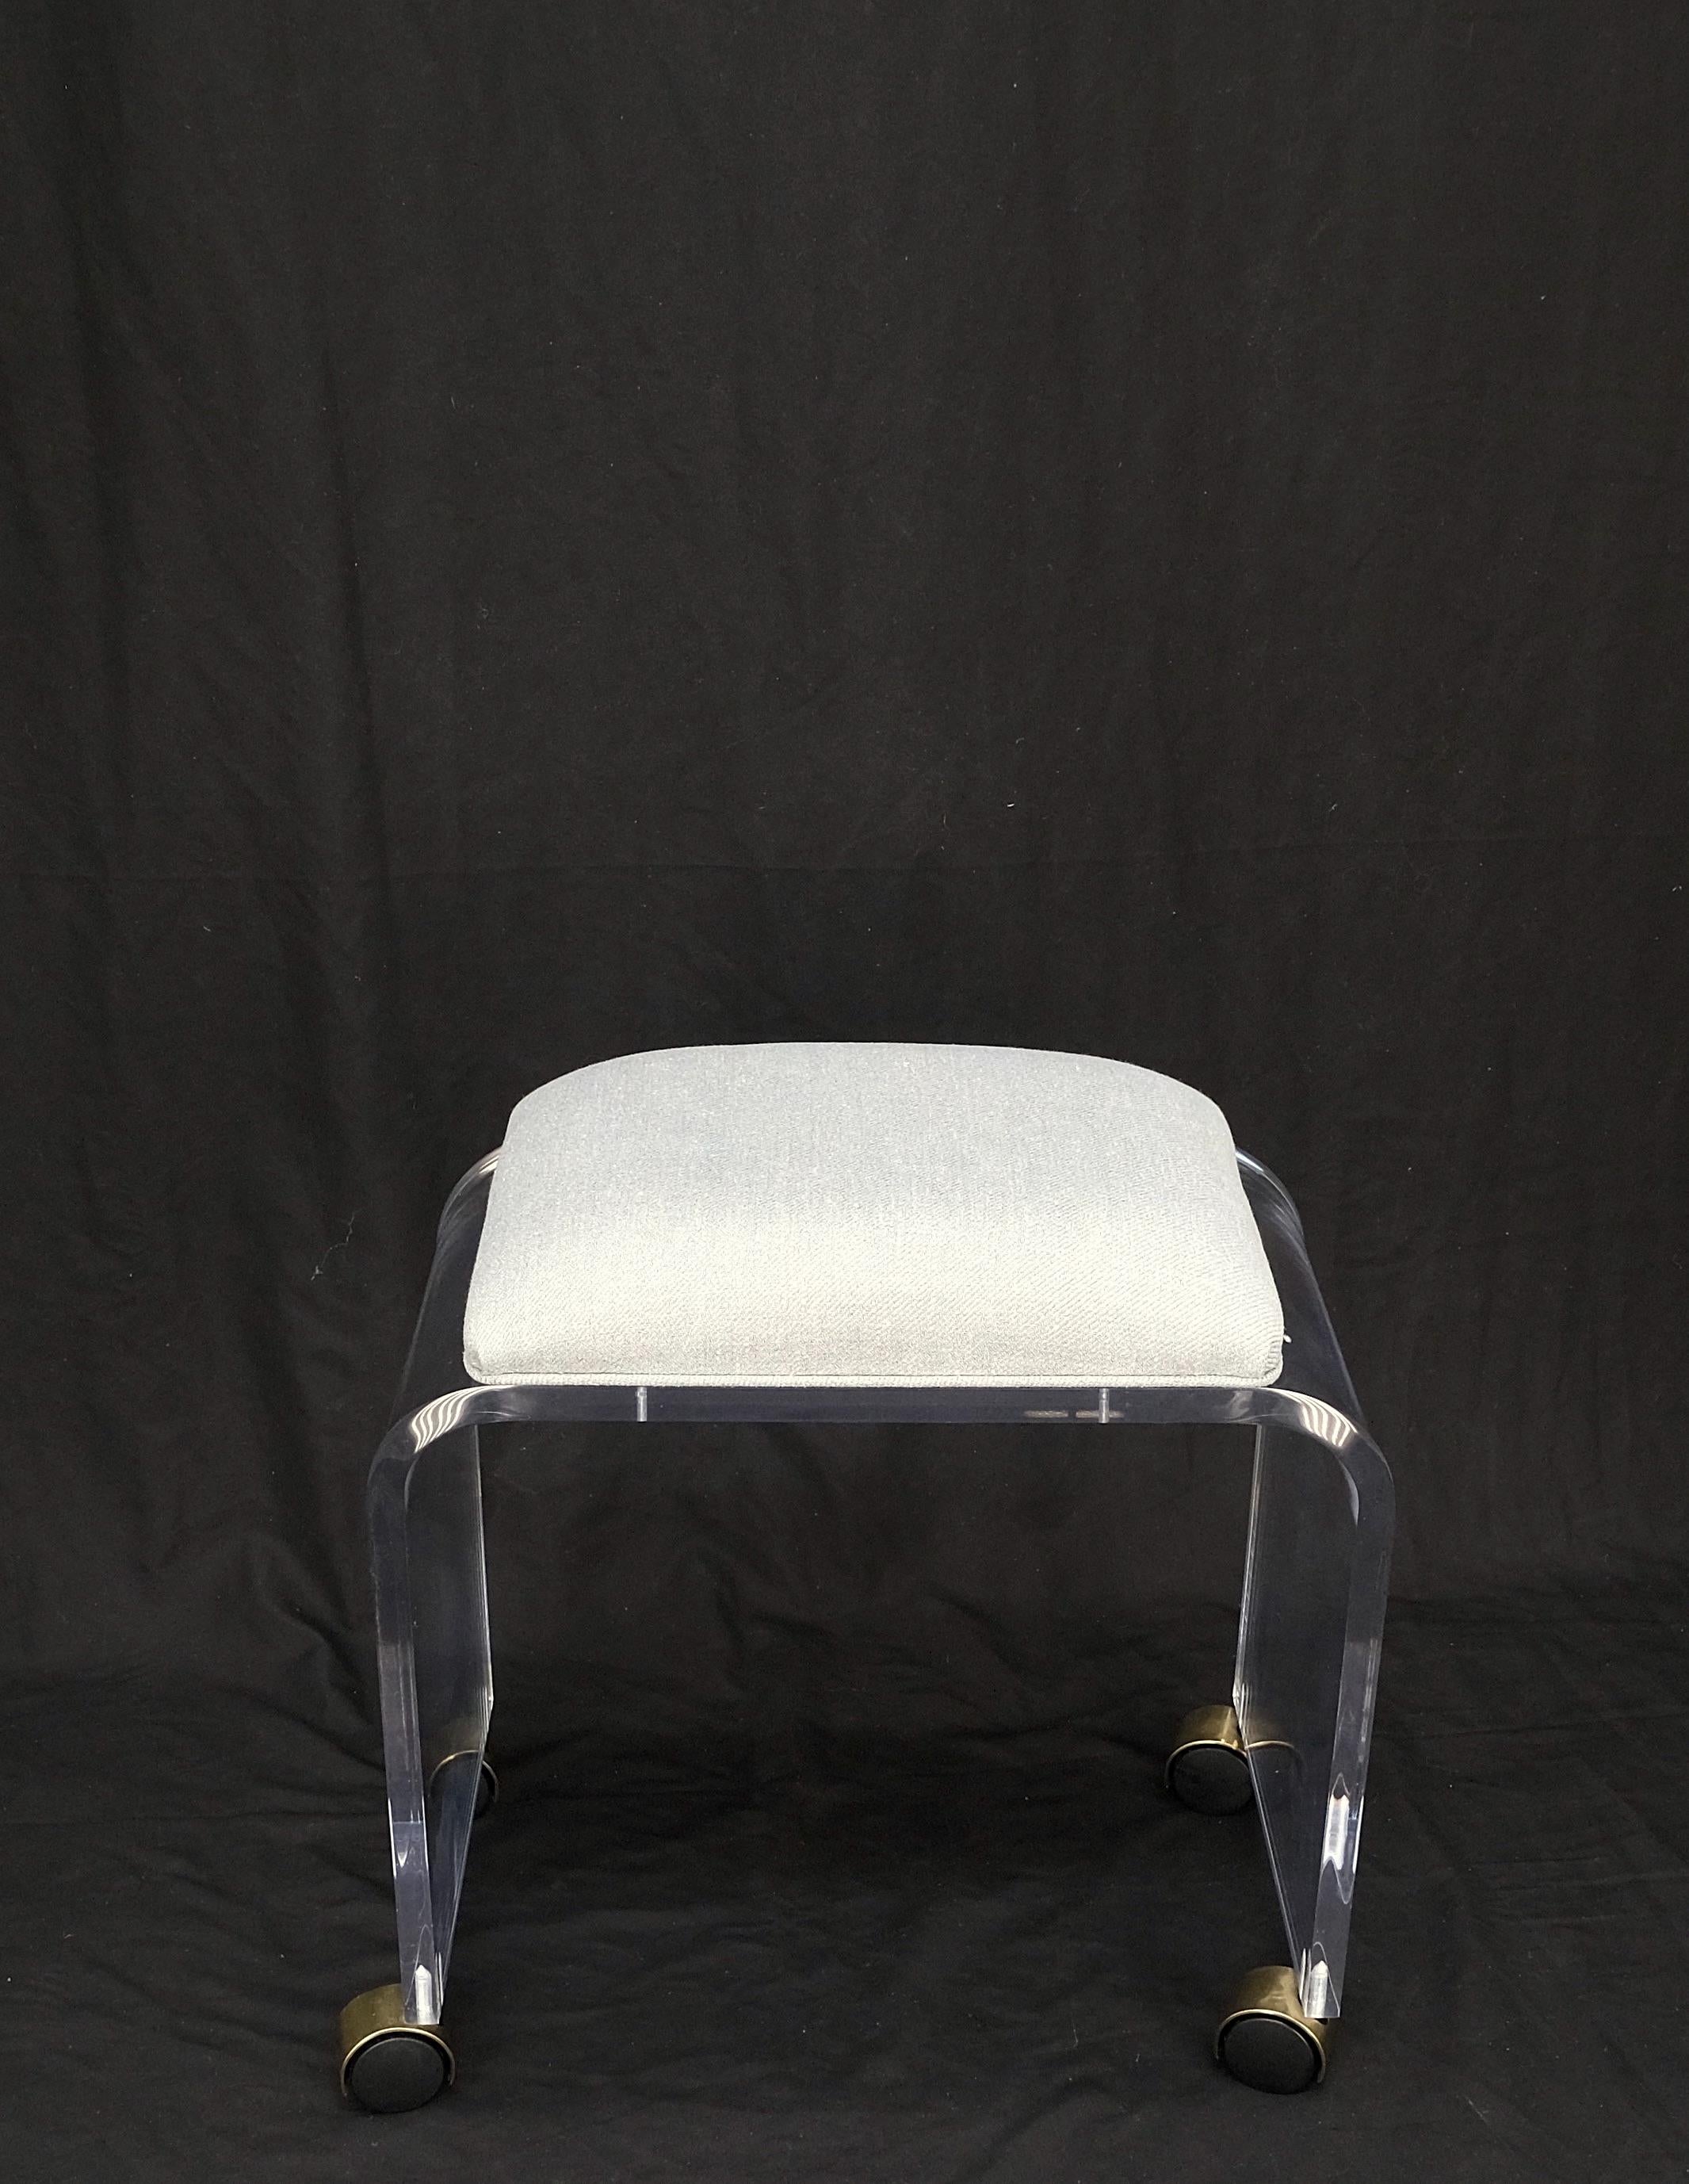 20th Century Bent Lucite Mid-Century Modern New Upholstery Piano Window Hall Bench on Casters